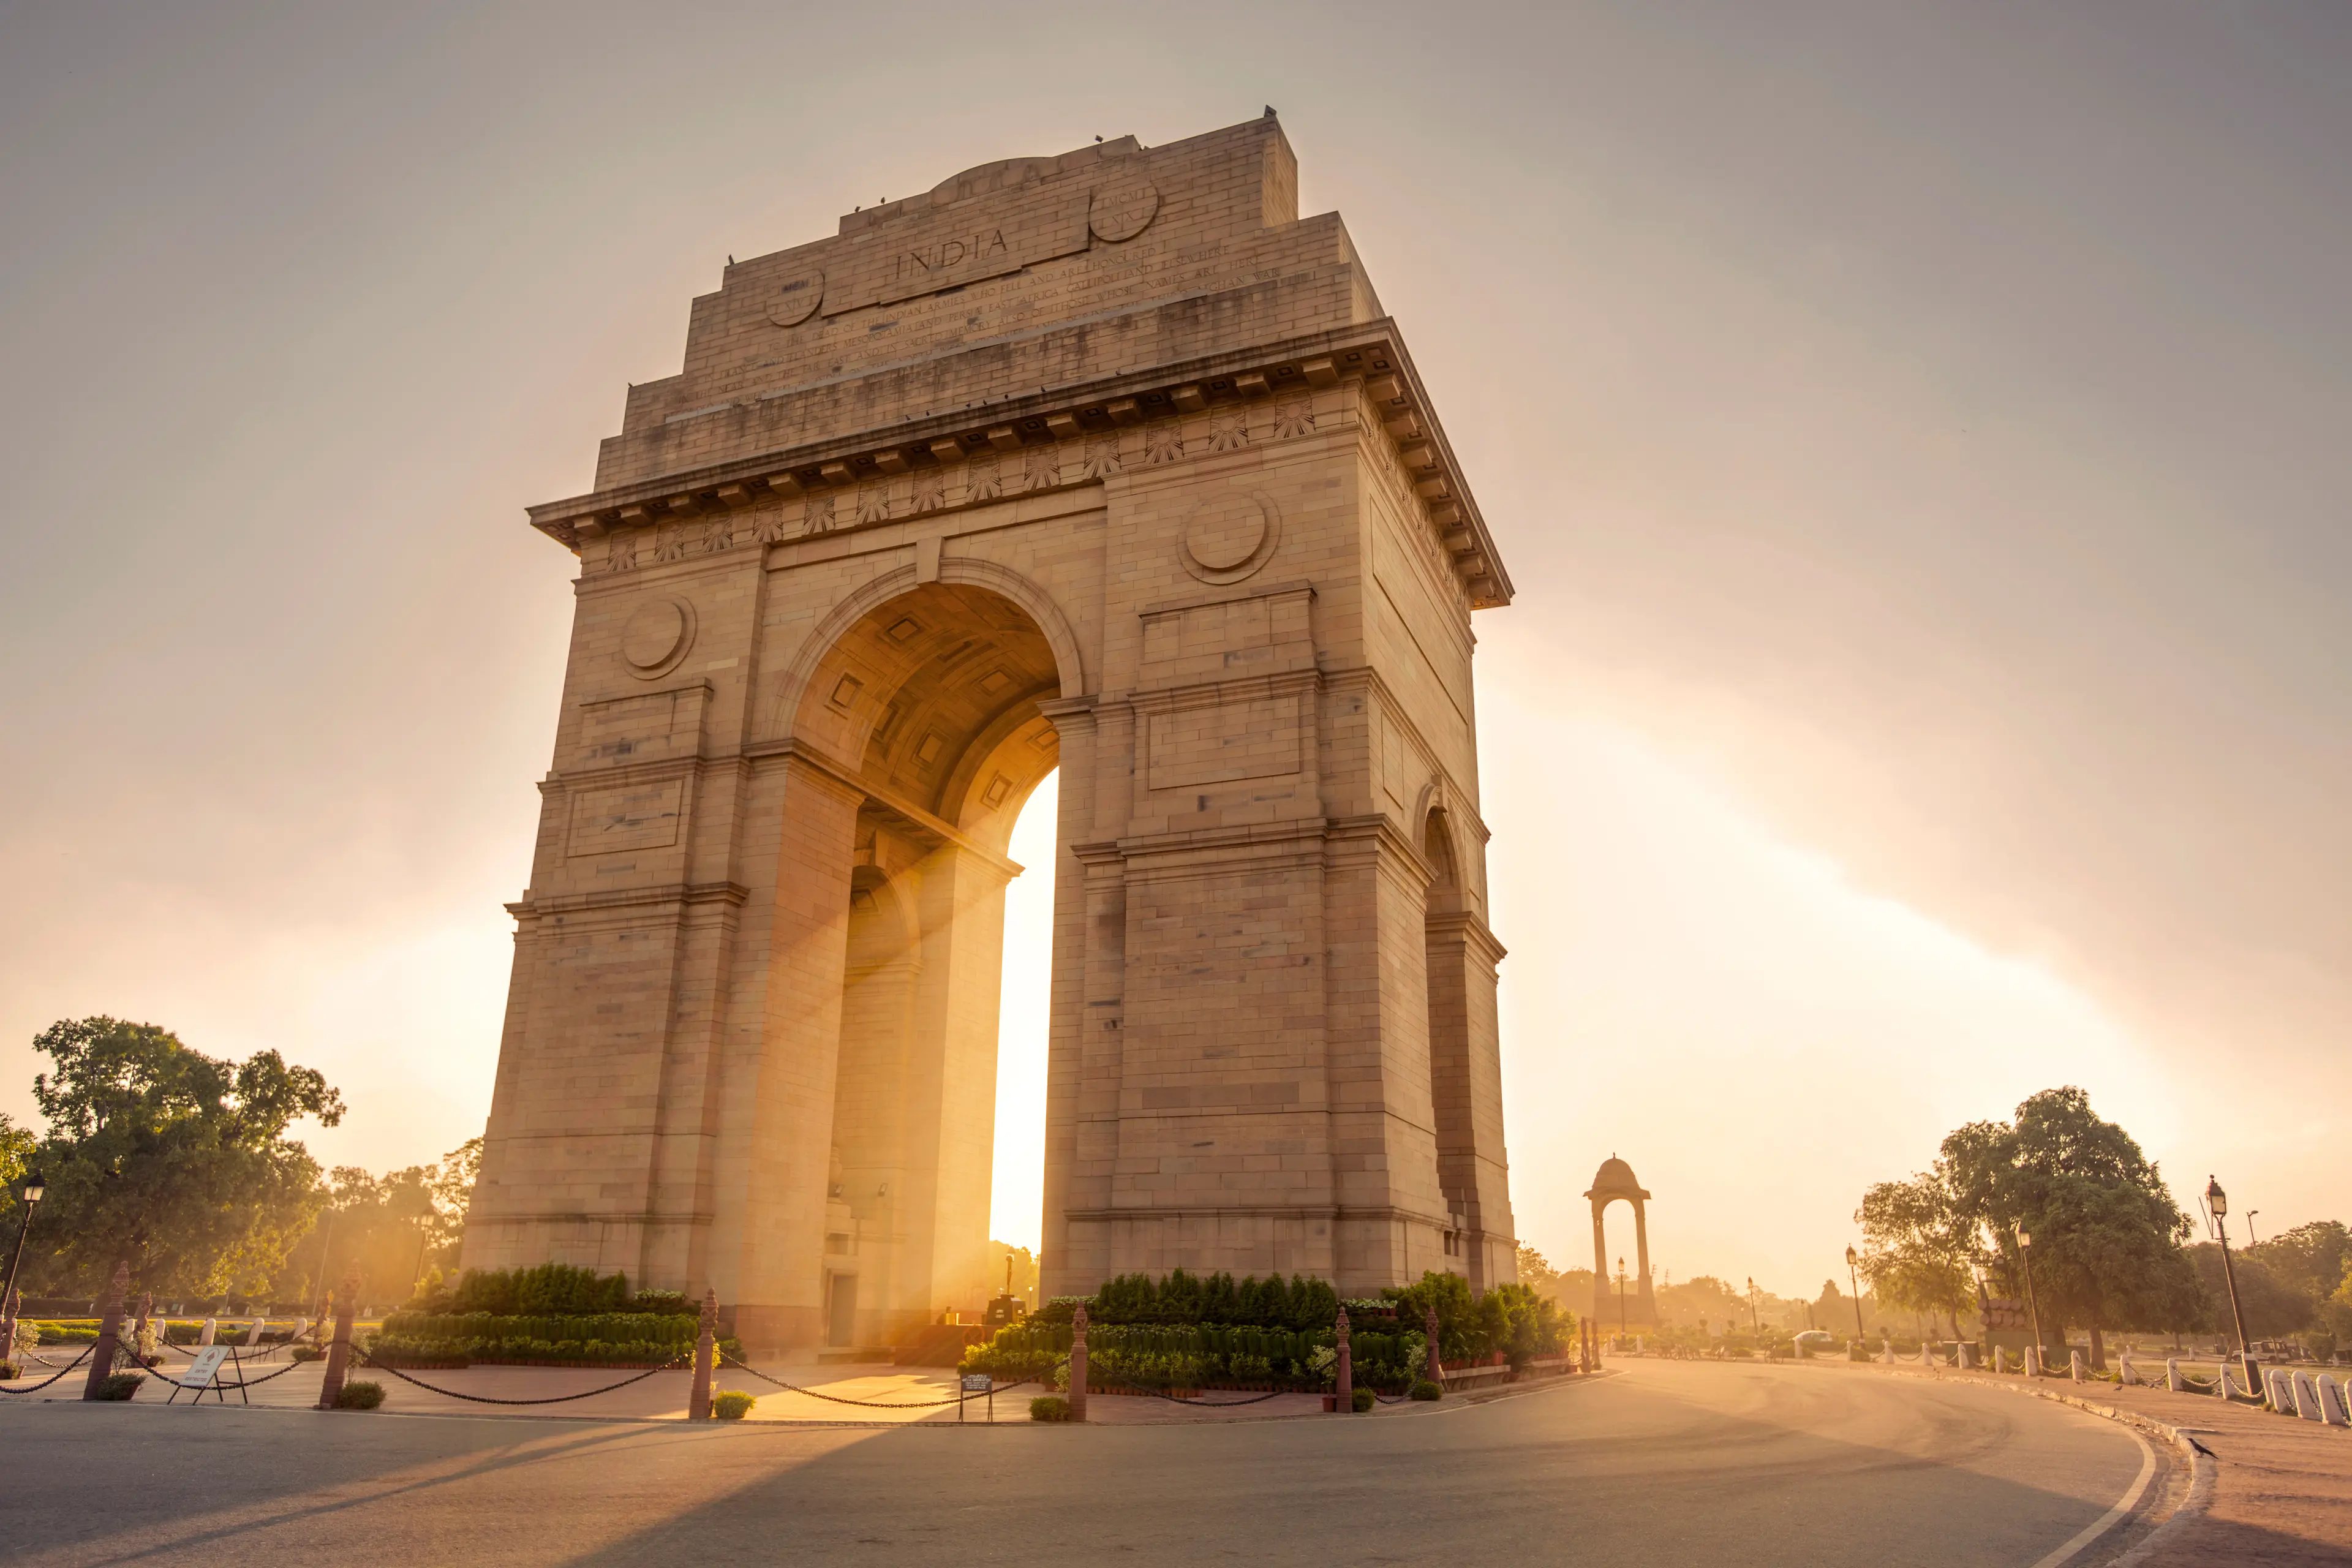 Delhi Delights: A Local's One-Day Food, Wine and Sightseeing Tour